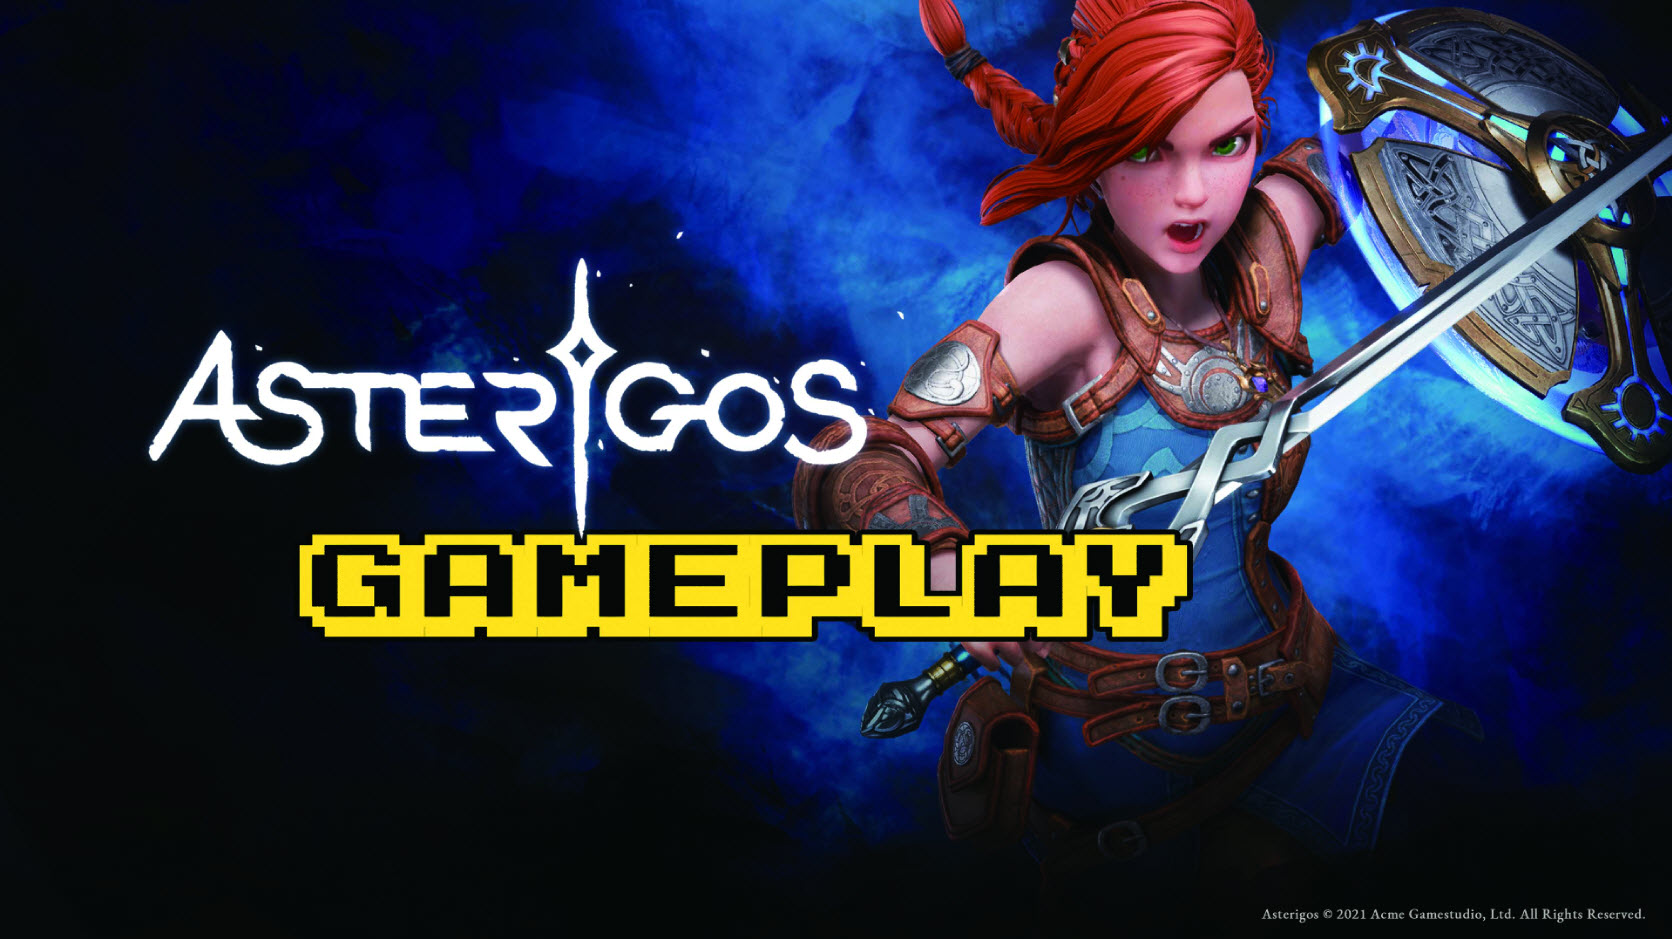 Asterigos: Curse of the Stars instal the last version for windows